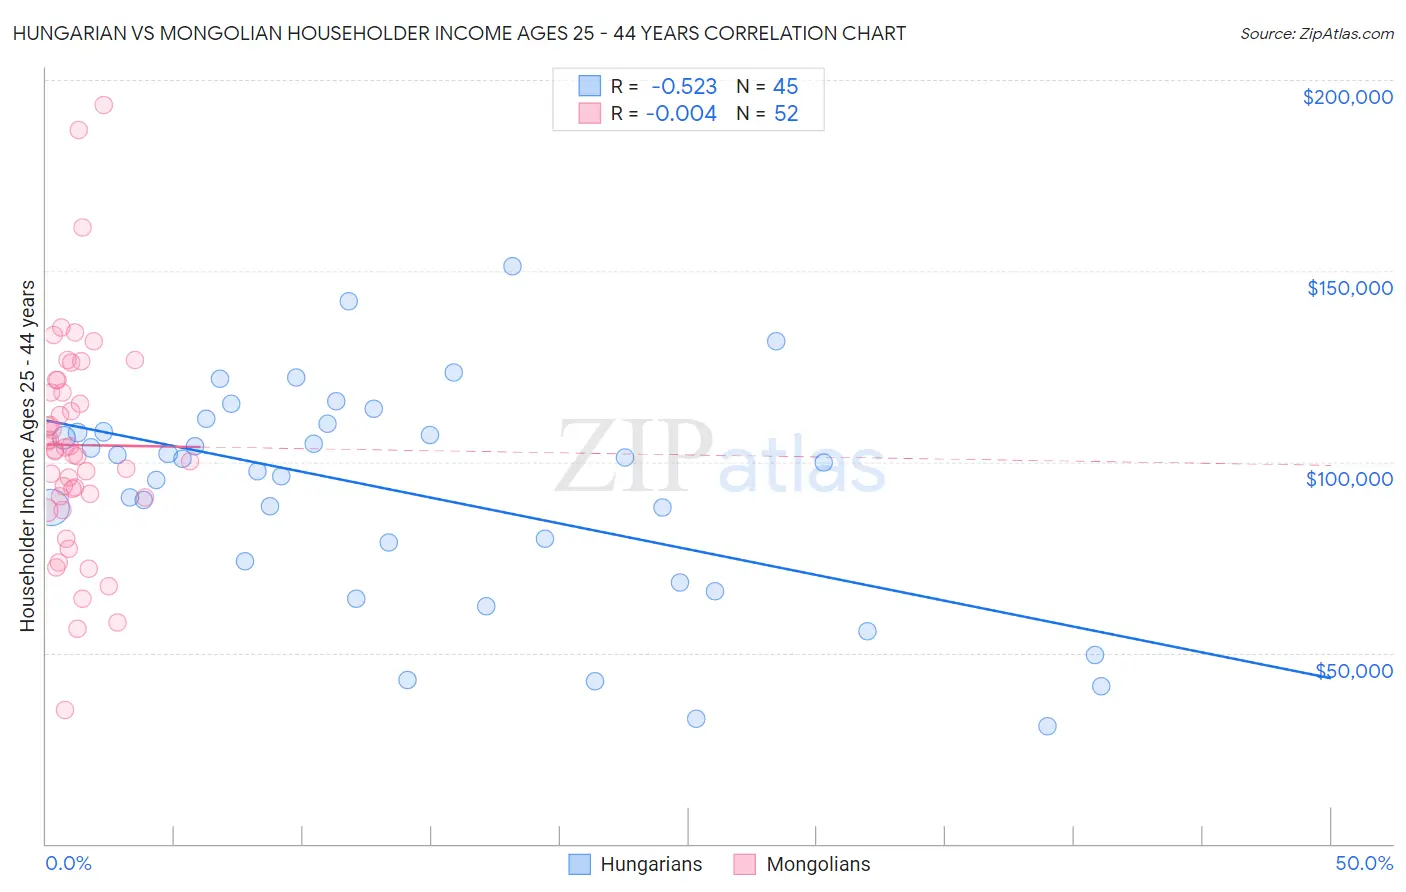 Hungarian vs Mongolian Householder Income Ages 25 - 44 years